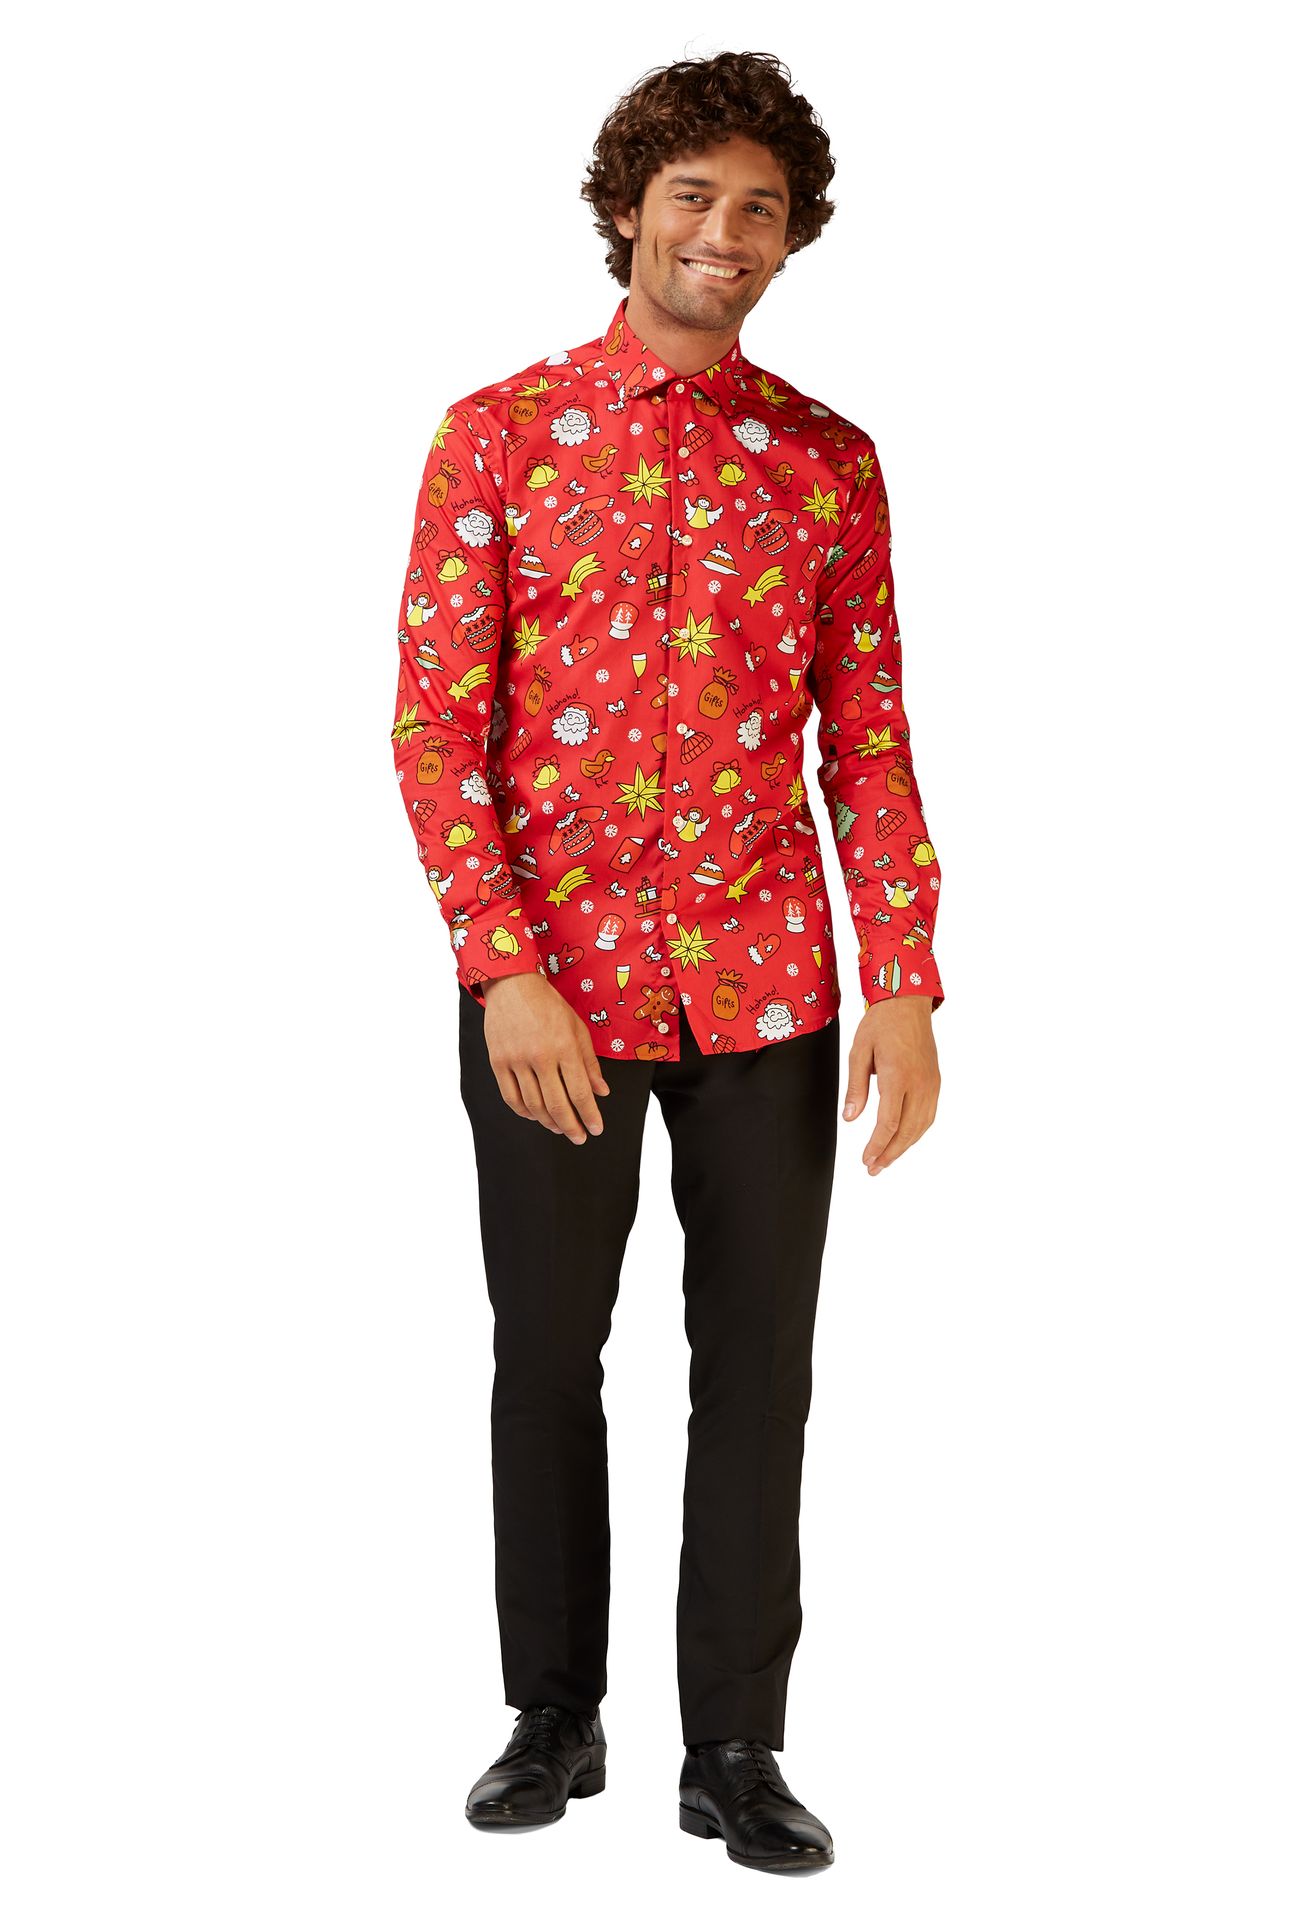 Opposuits Christmas Doodle rode kerst blouse